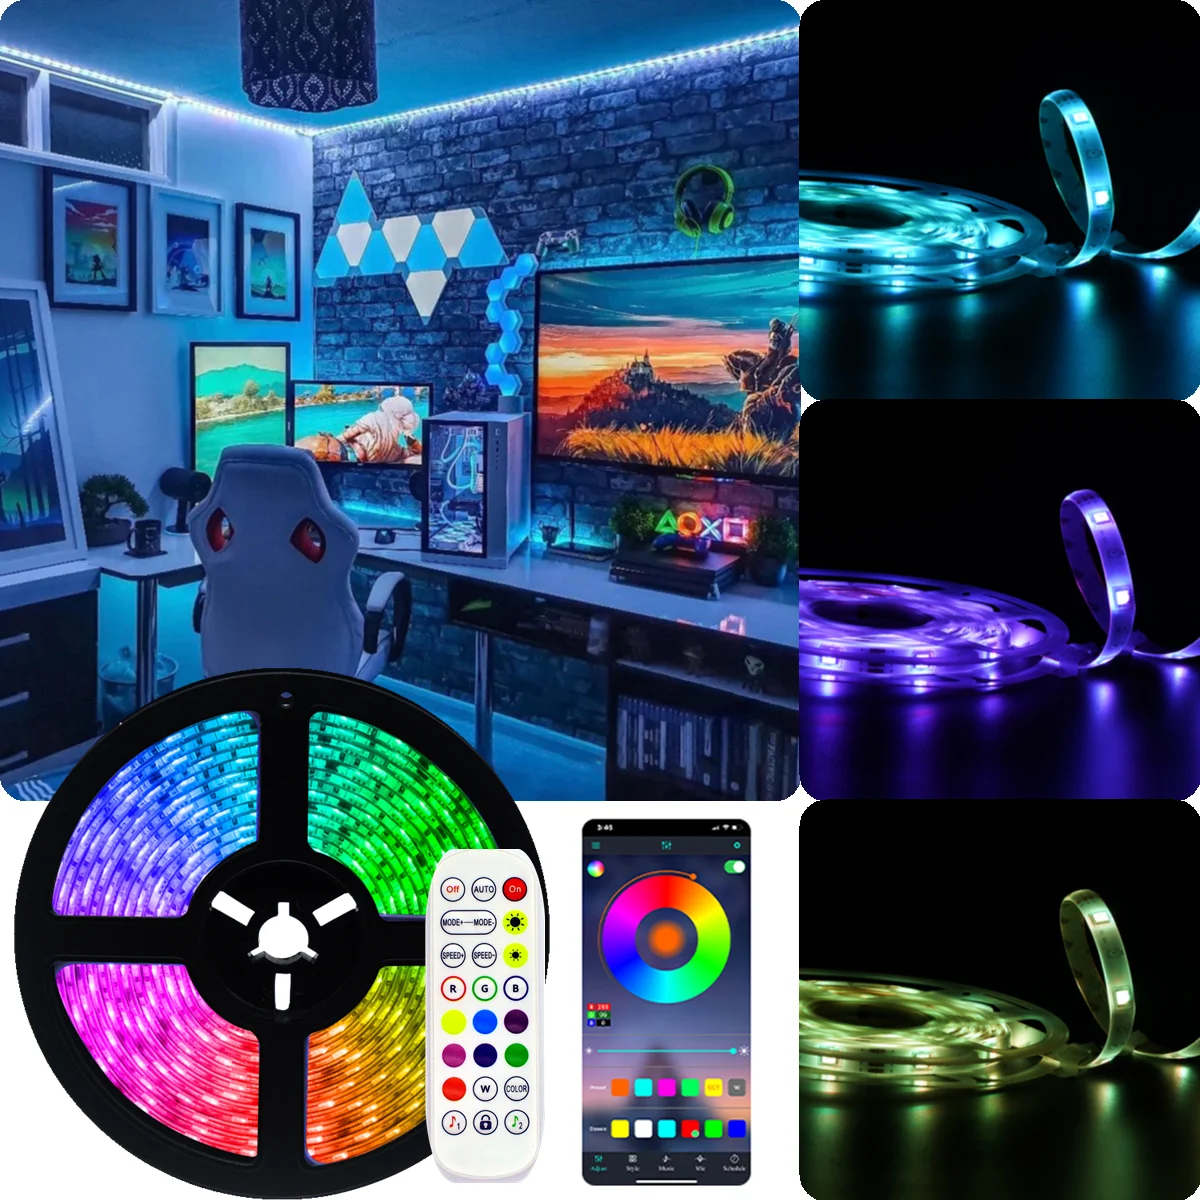 

LED Strip Lights RGB 5050 SMD 2835 Waterproof Lamp Flexible Tape Diode luces led DC12V 5M 10M For Room Decor Holiday decoration